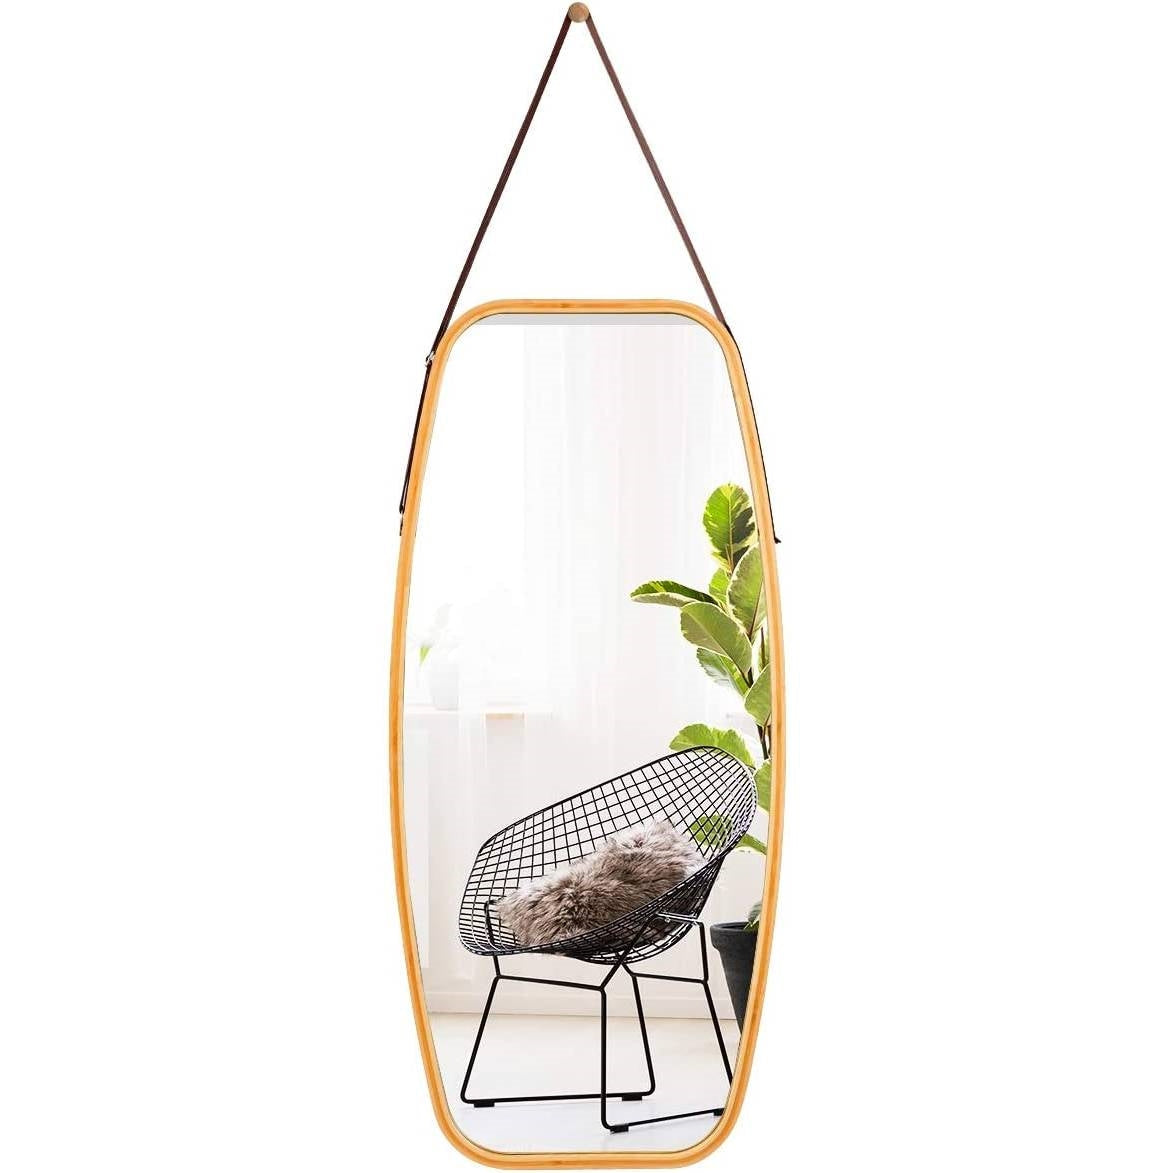 Accents > Mirrors - Wall Hanging Bedroom Bathroom Rectangular Mirror With Bamboo Frame 39 X 18 Inch